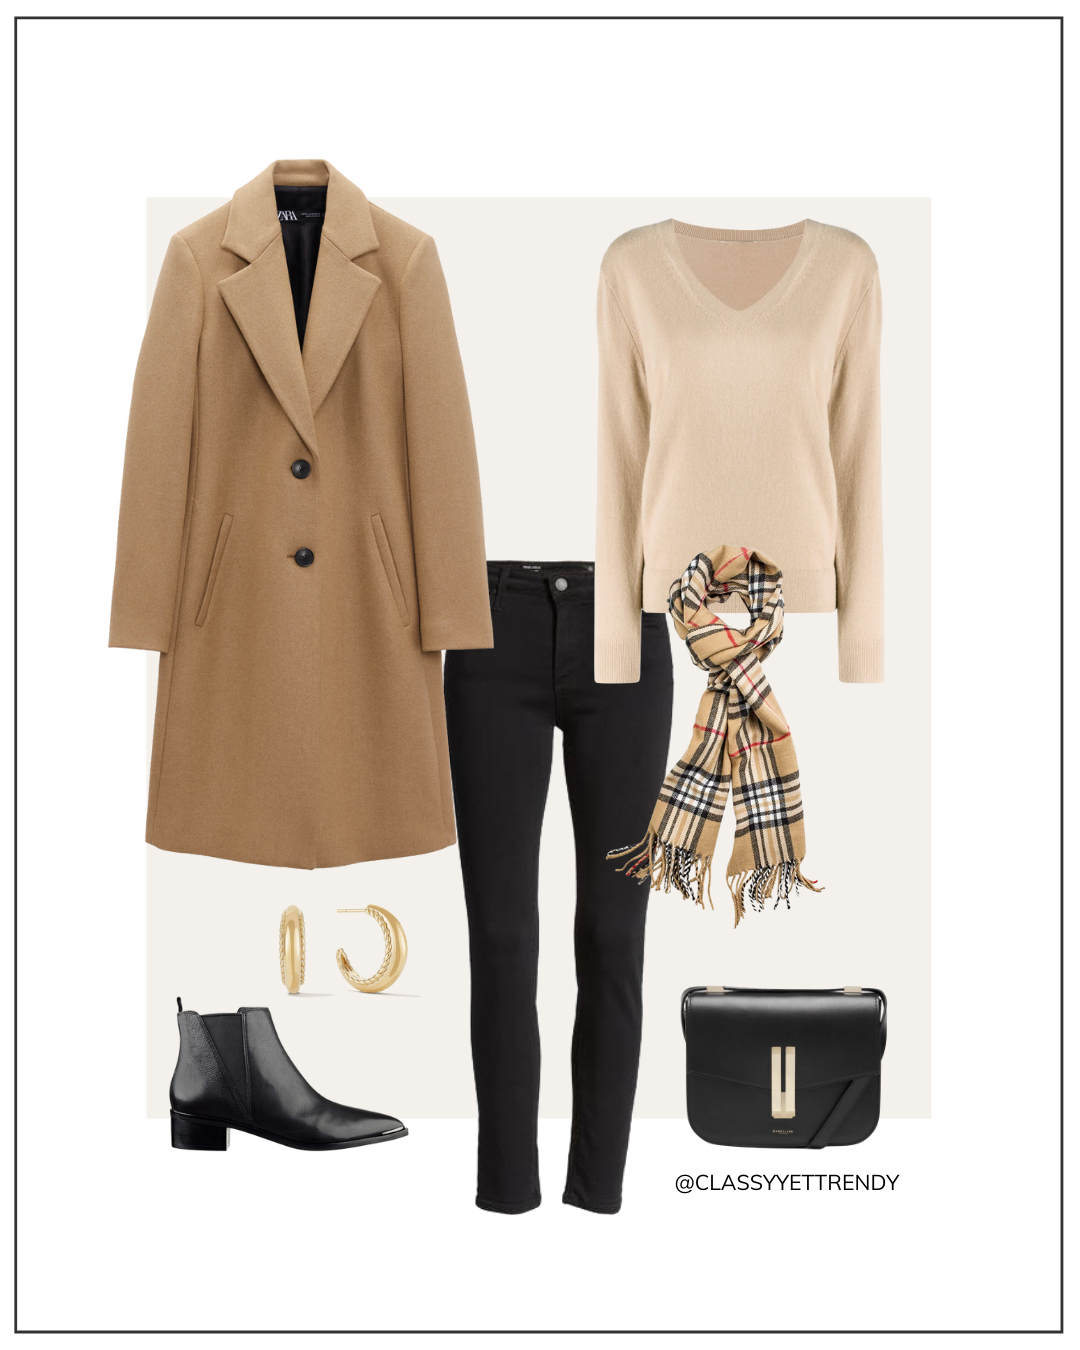 A Week Of Fall Outfits Using Wardrobe Staples - Classy Yet Trendy